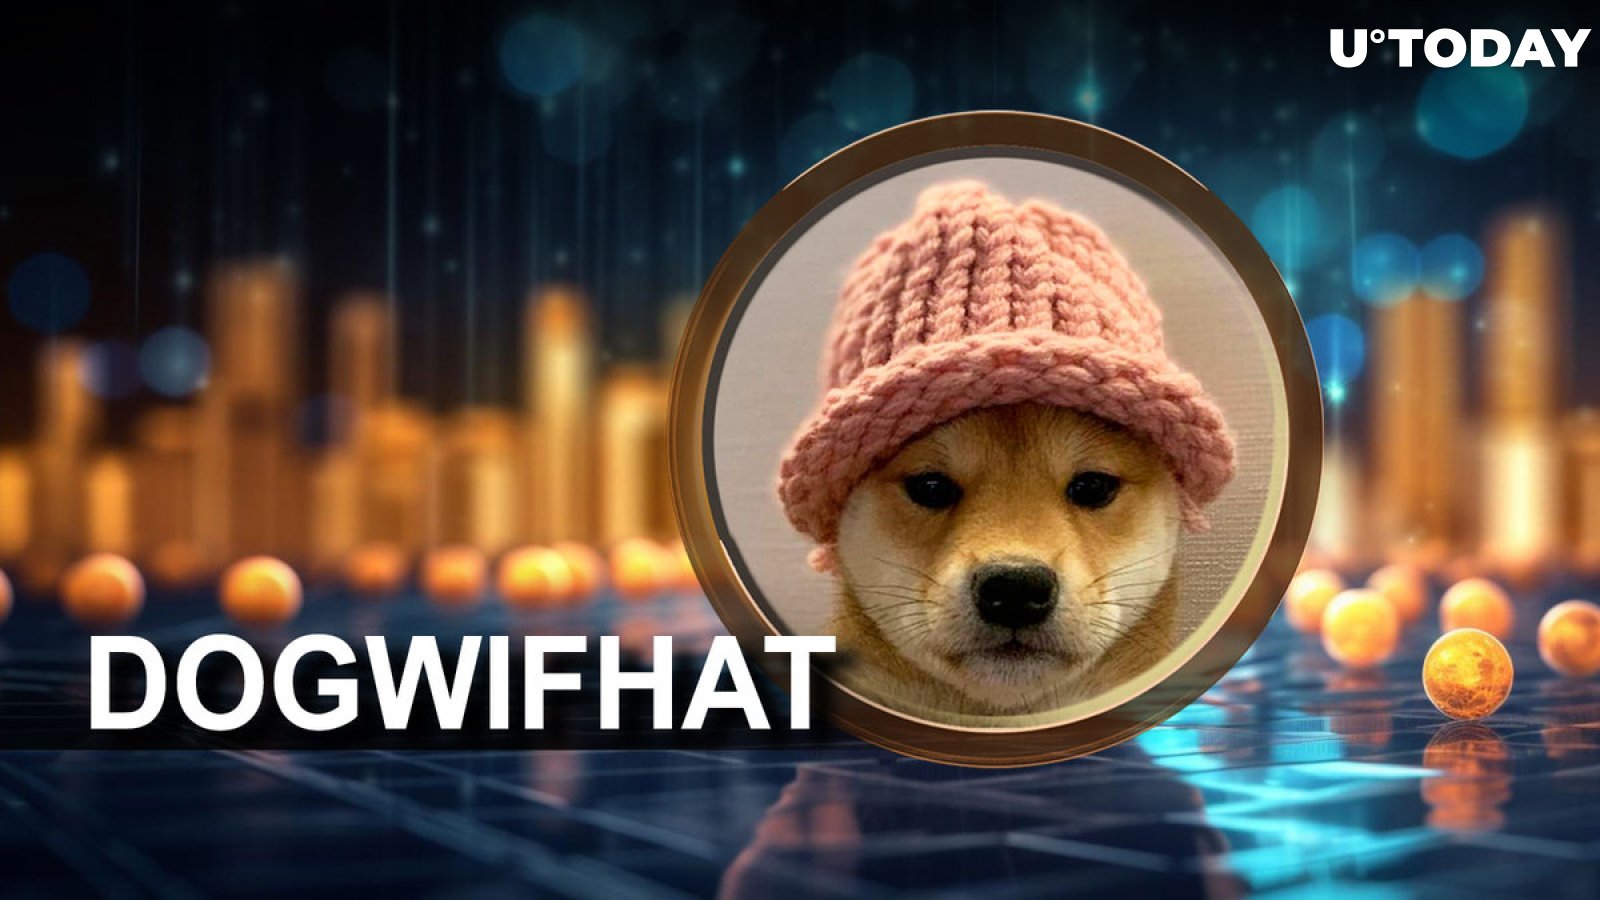 Dogwifhat (WIF) Price Skyrockets as Solana Meme Coin Achieves Major Exchange Listing